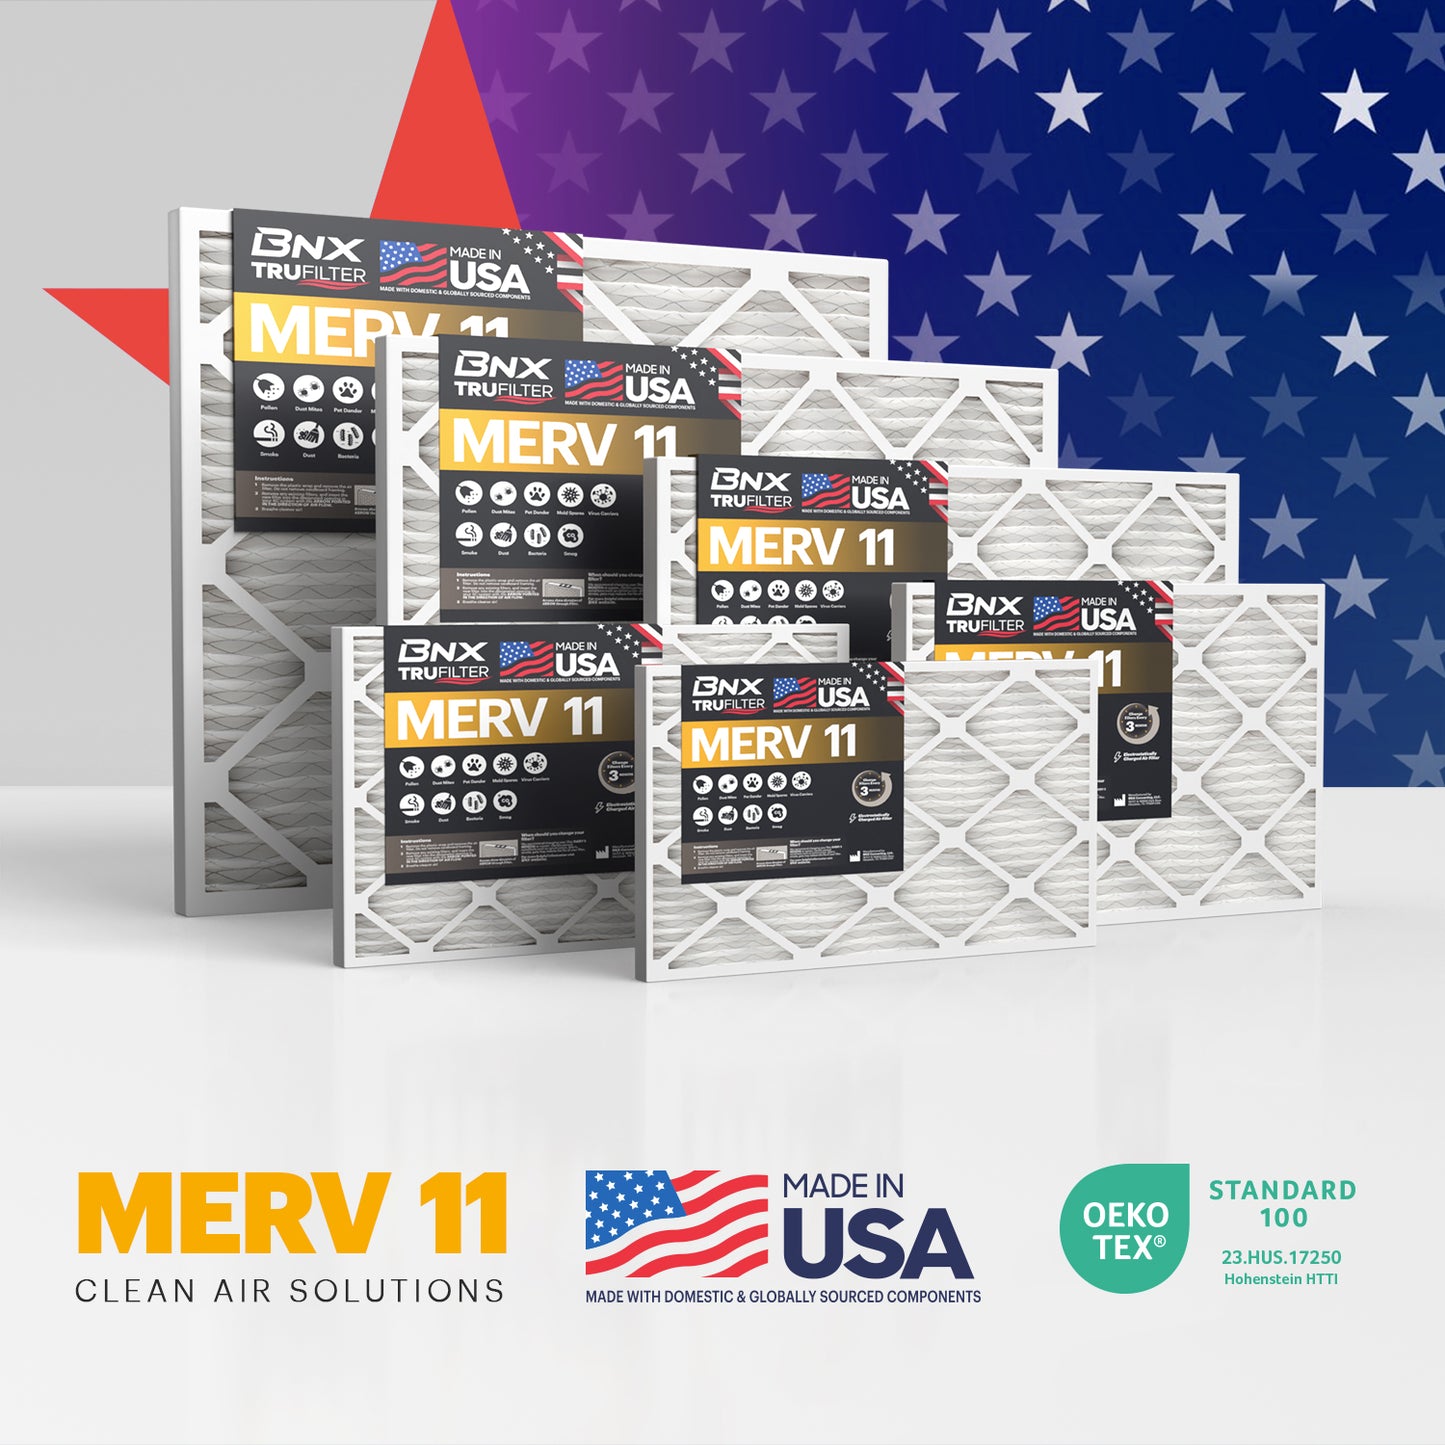 BNX TruFilter 16x25x4 MERV 11 Pleated Air Filter – Made in USA (2-Pack) (Slim Fit)